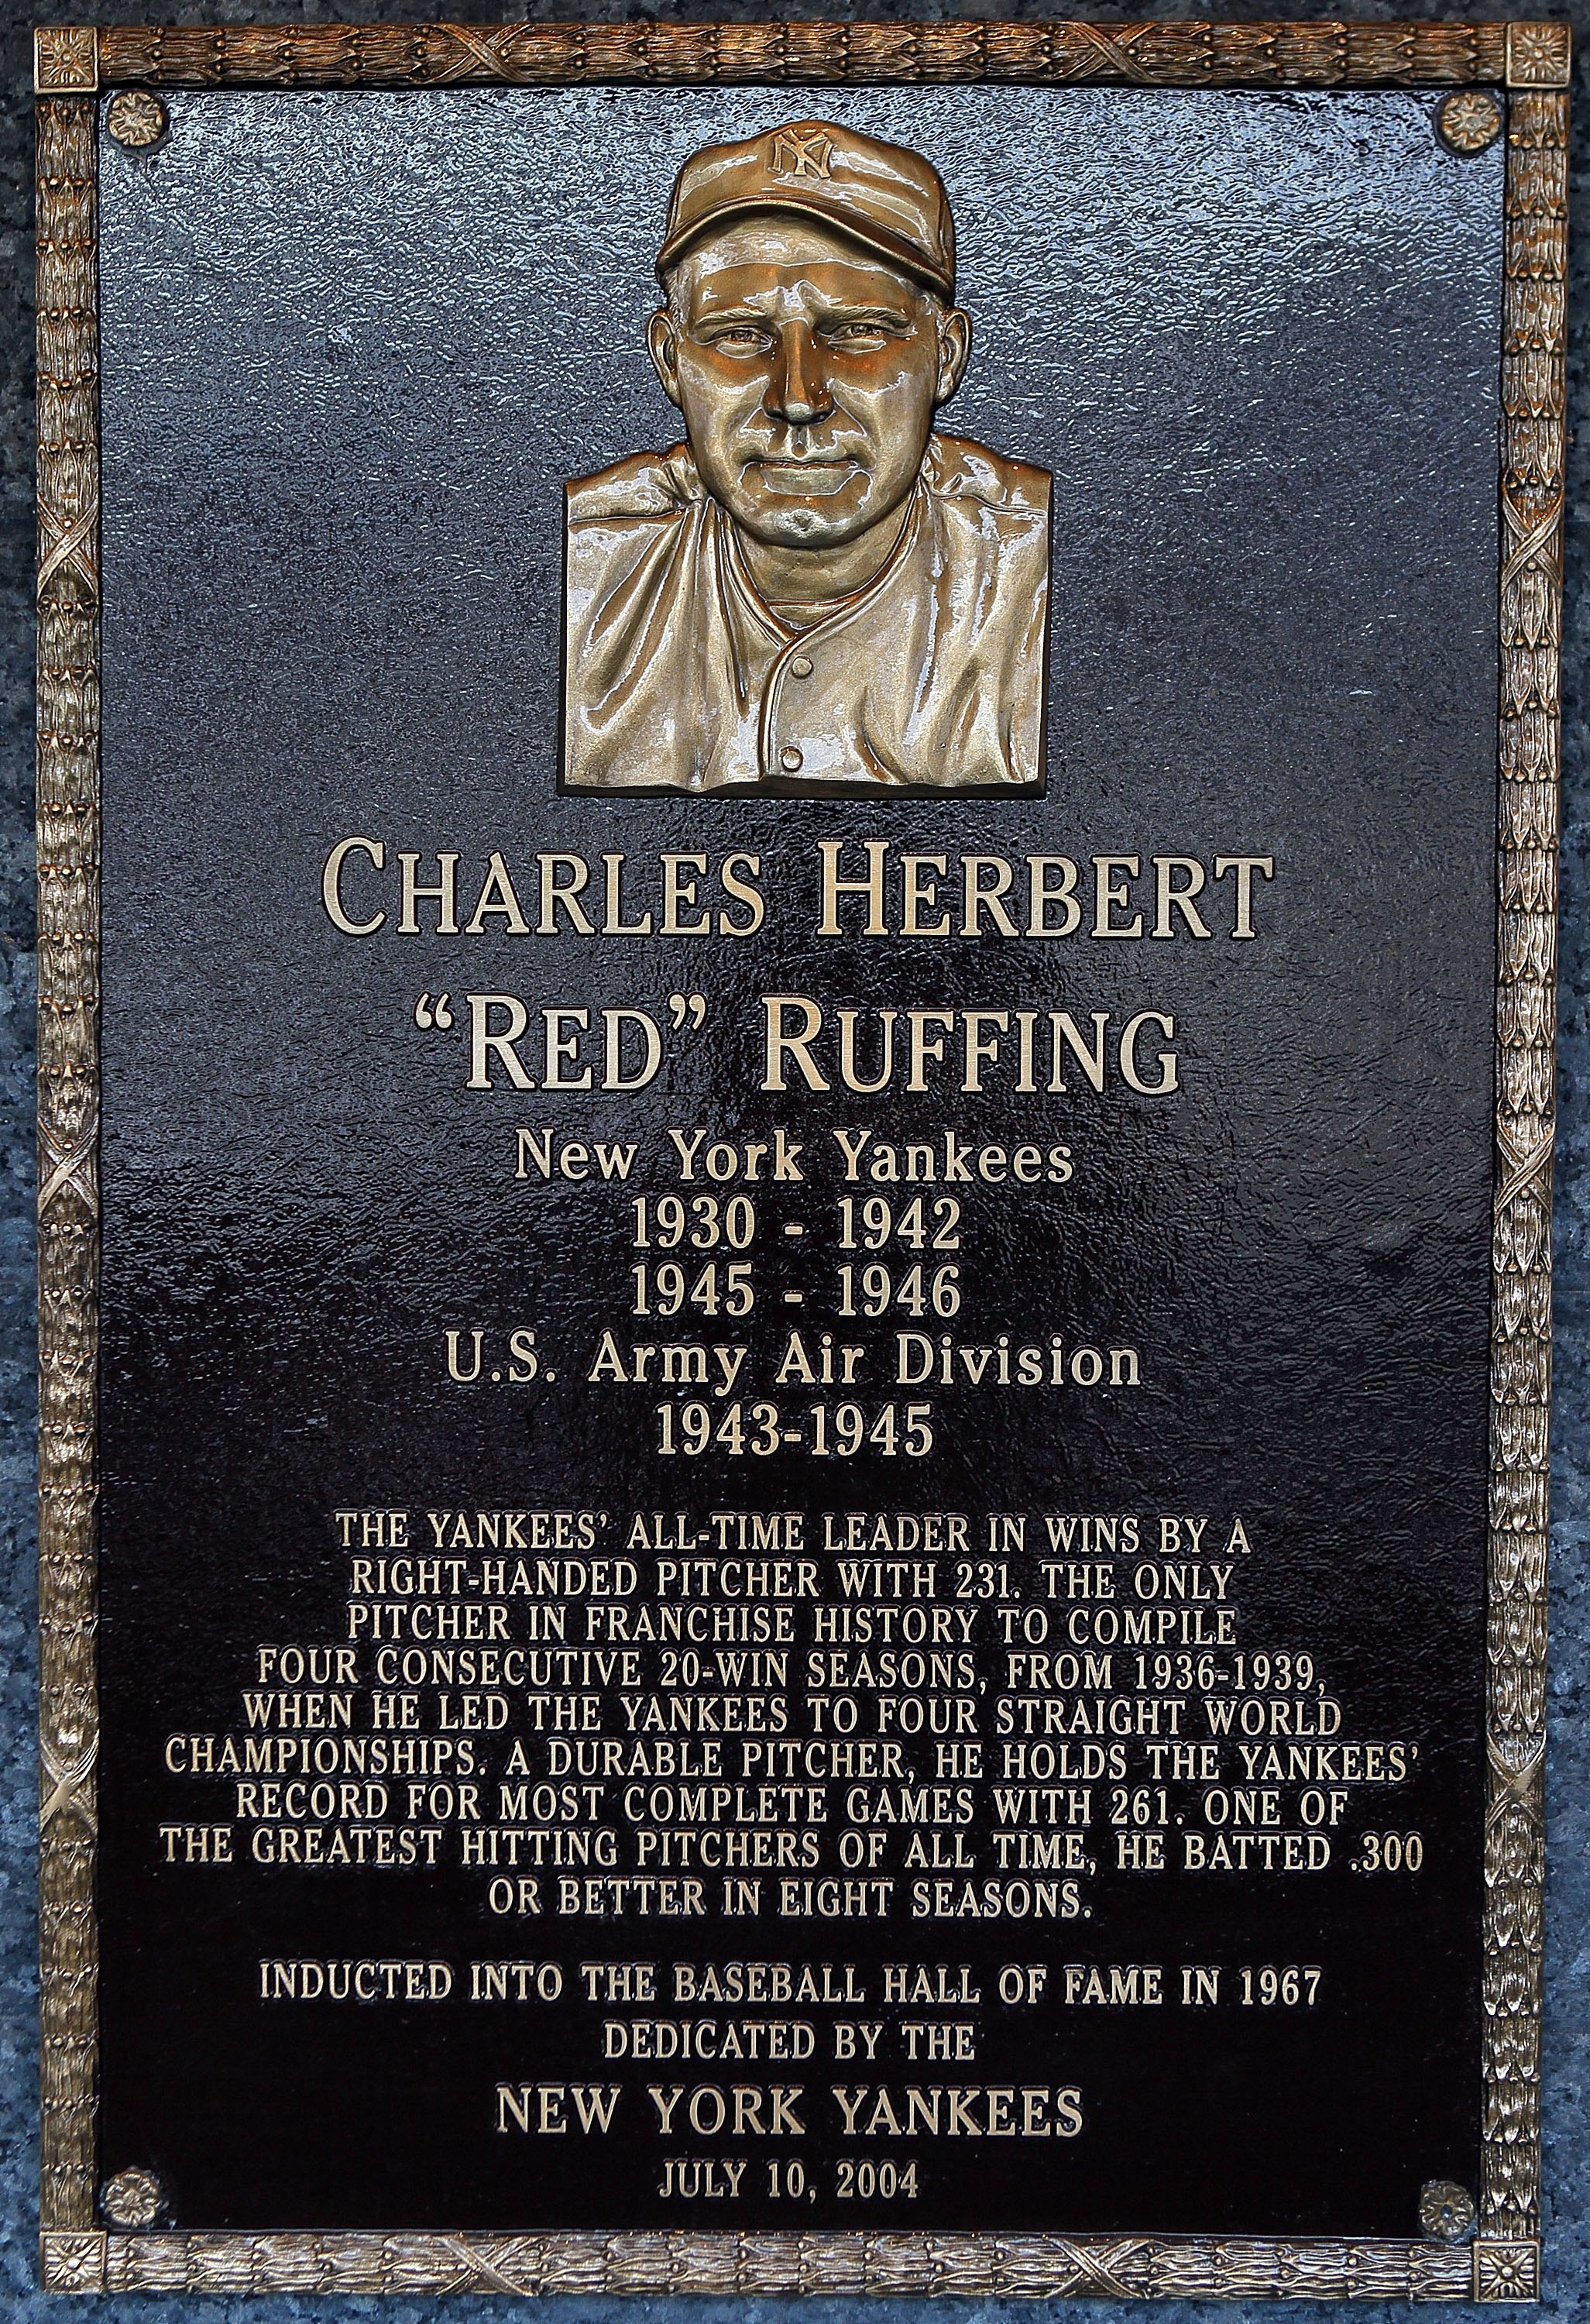 NEW YORK - MAY 02:  The plaque of Charles Ruffing is seen in Monument Park at Yankee Stadium prior to the game between the New York Yankees and the Chicago White Sox on May 2, 2010 in the Bronx borough of New York City. The Yankees defeated the White Sox